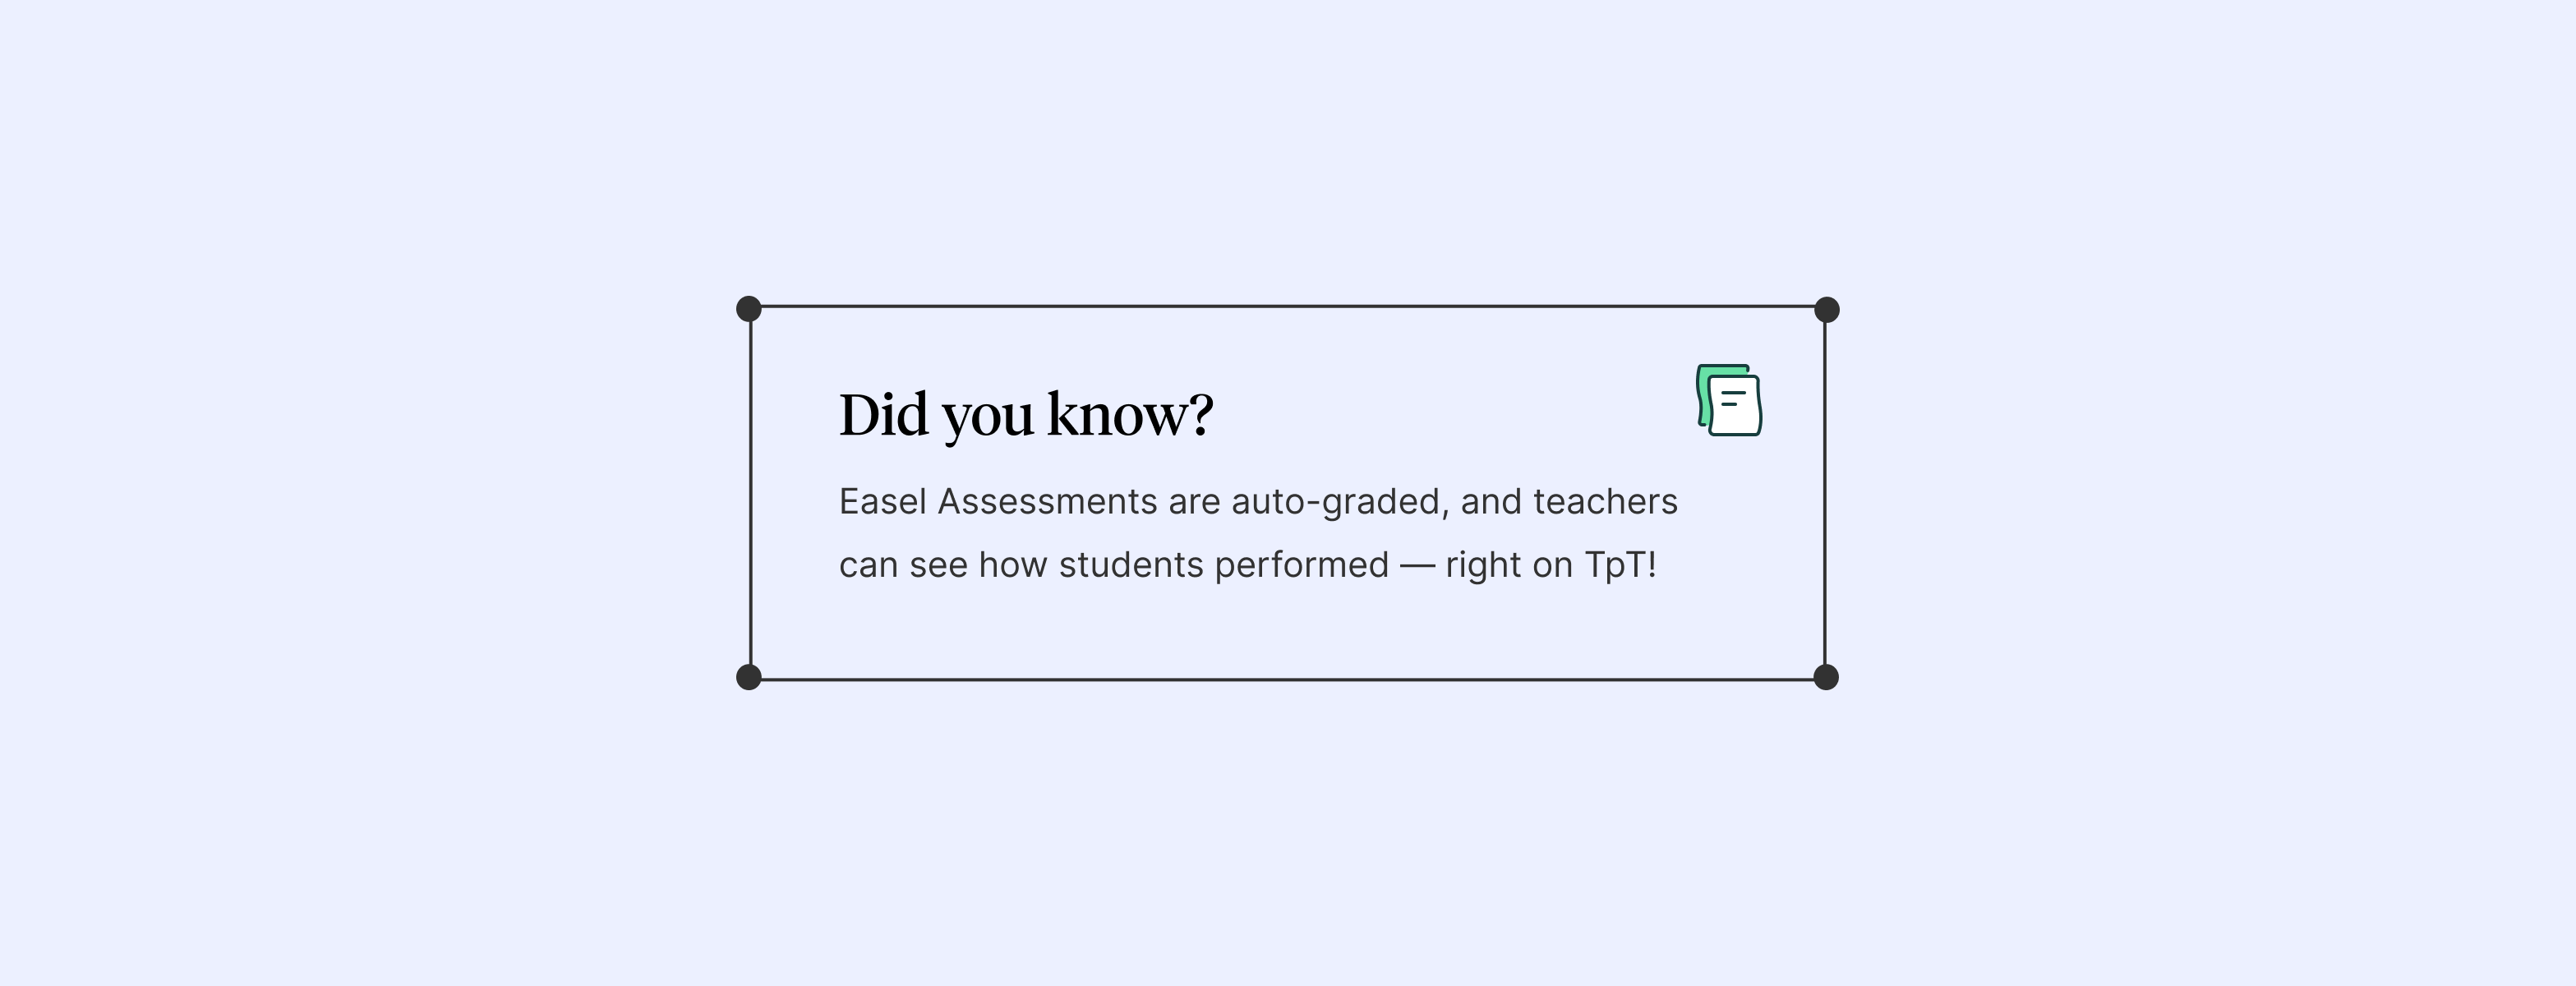 Did you Know? Easel Assessments are auto-graded, and teachers can see how students performed — right on TpT!